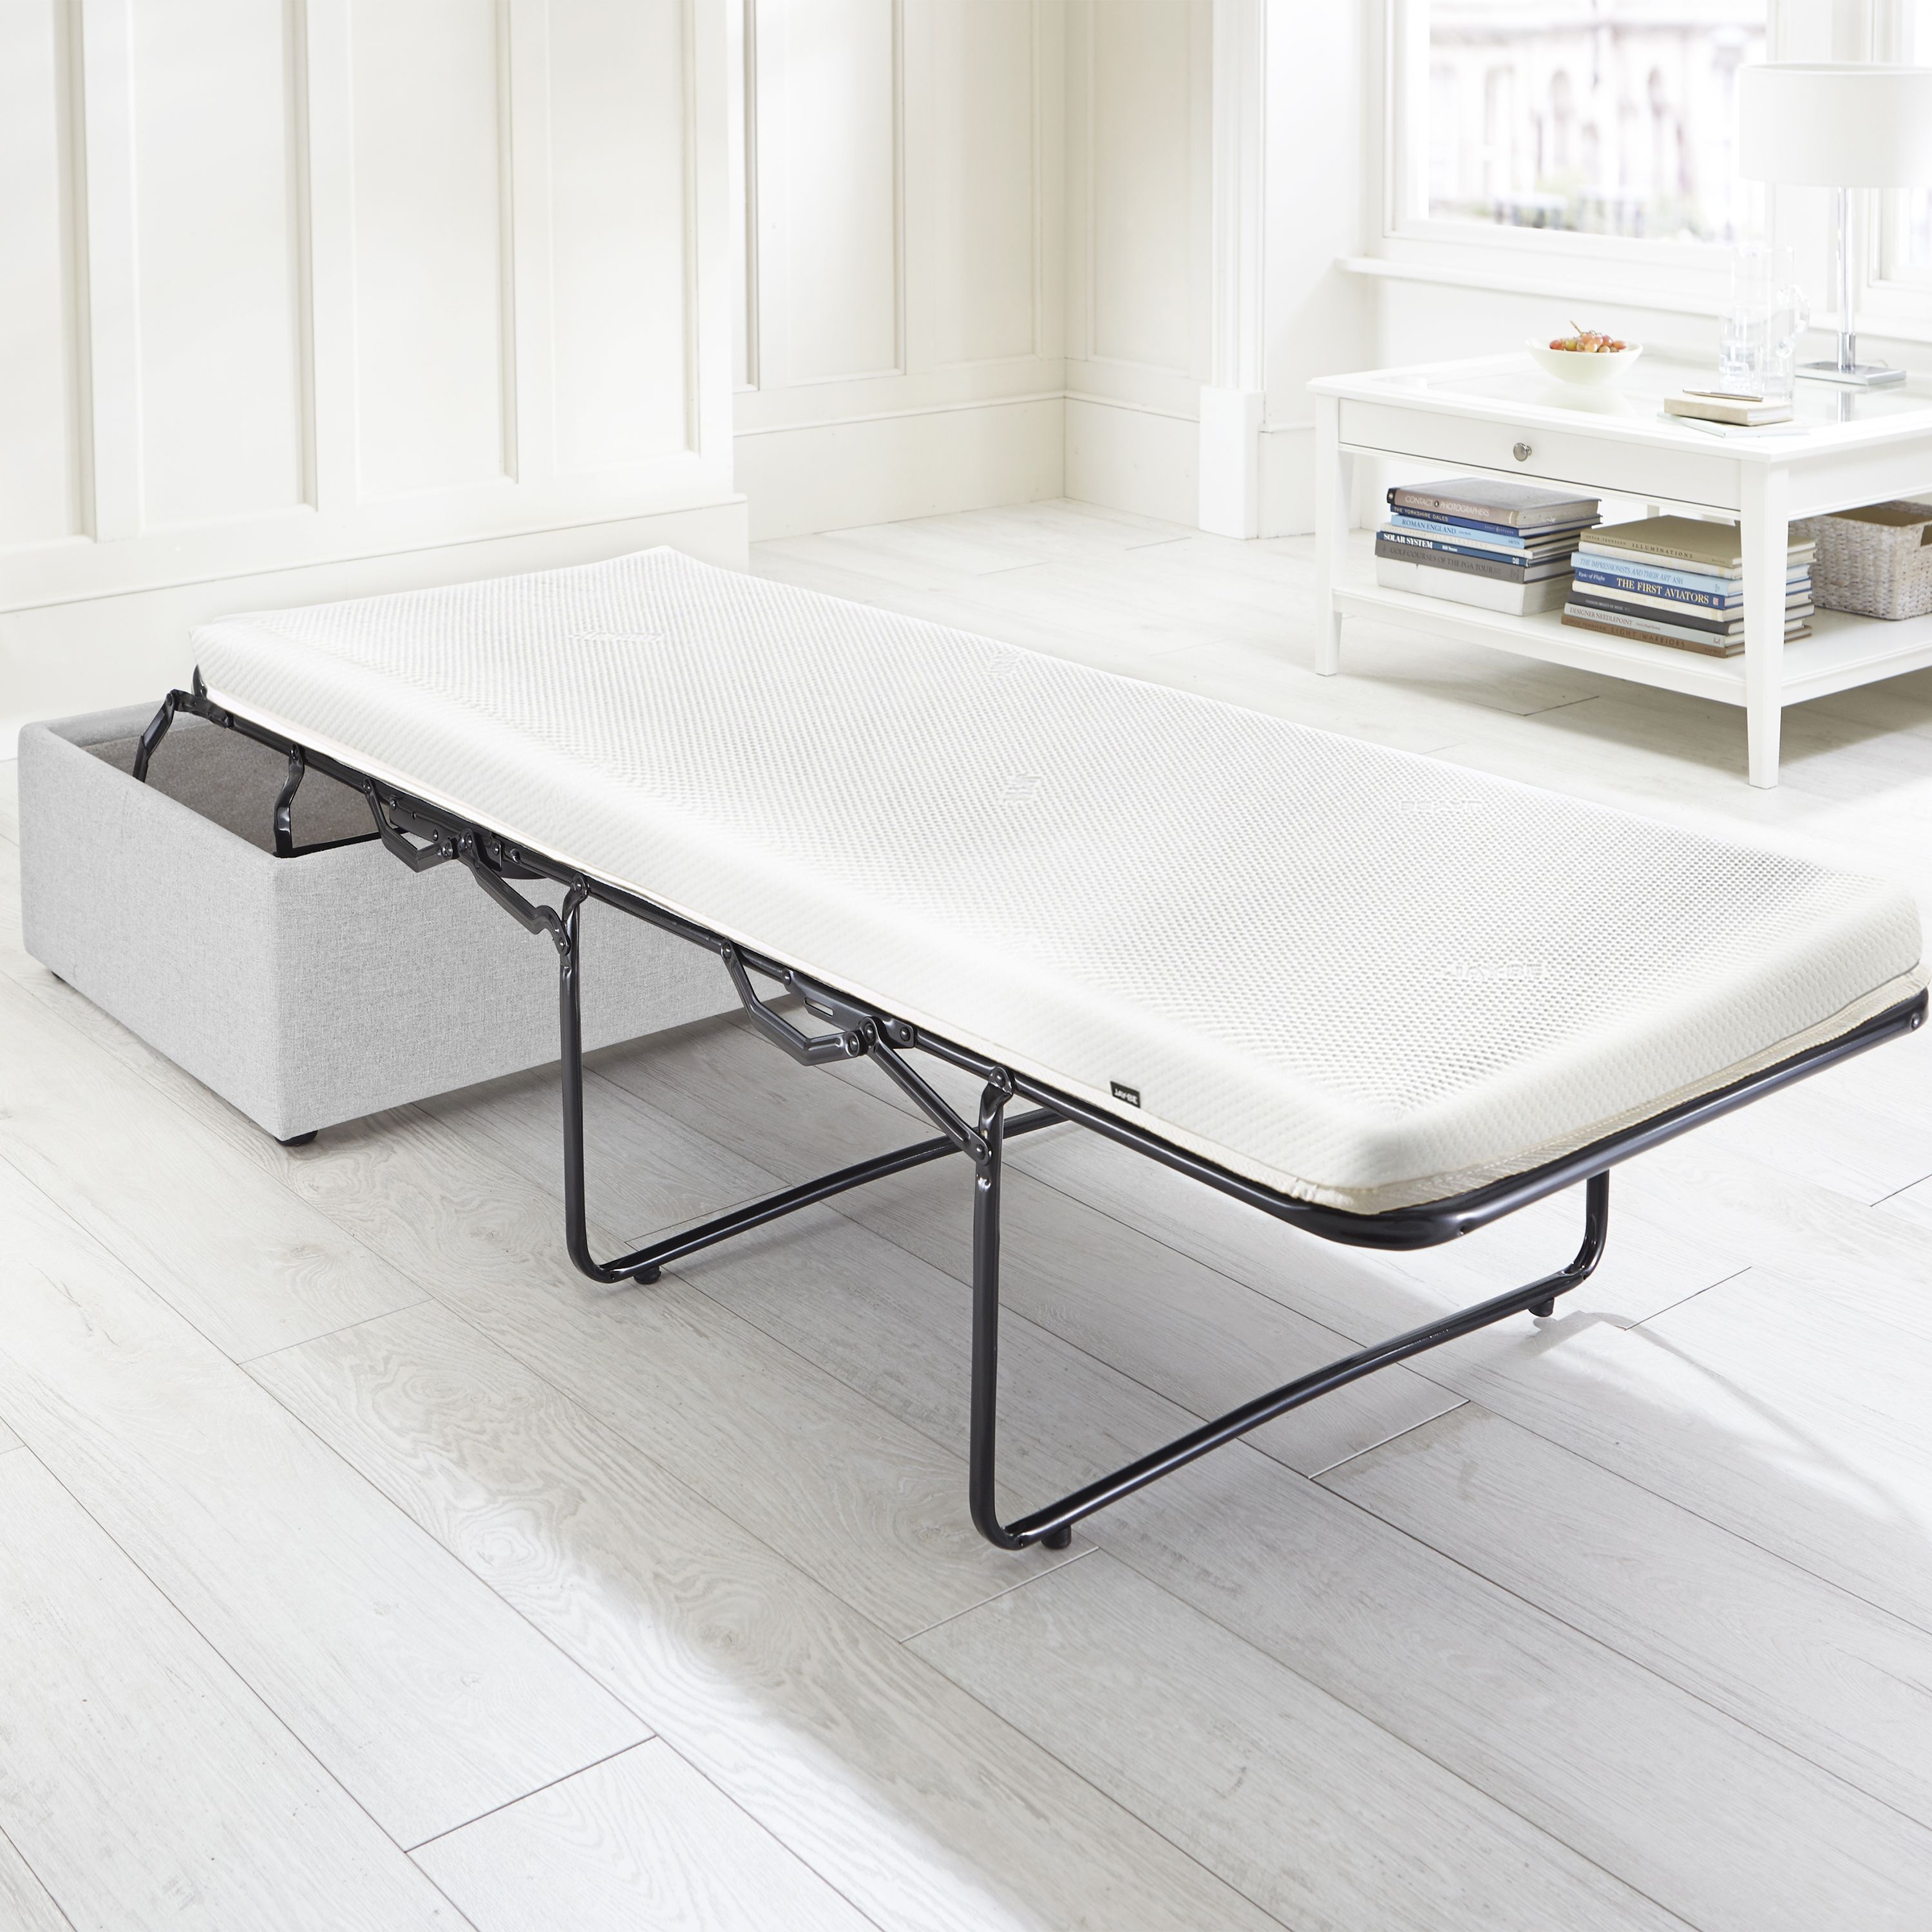 Jay-Be Dove Footstool bed